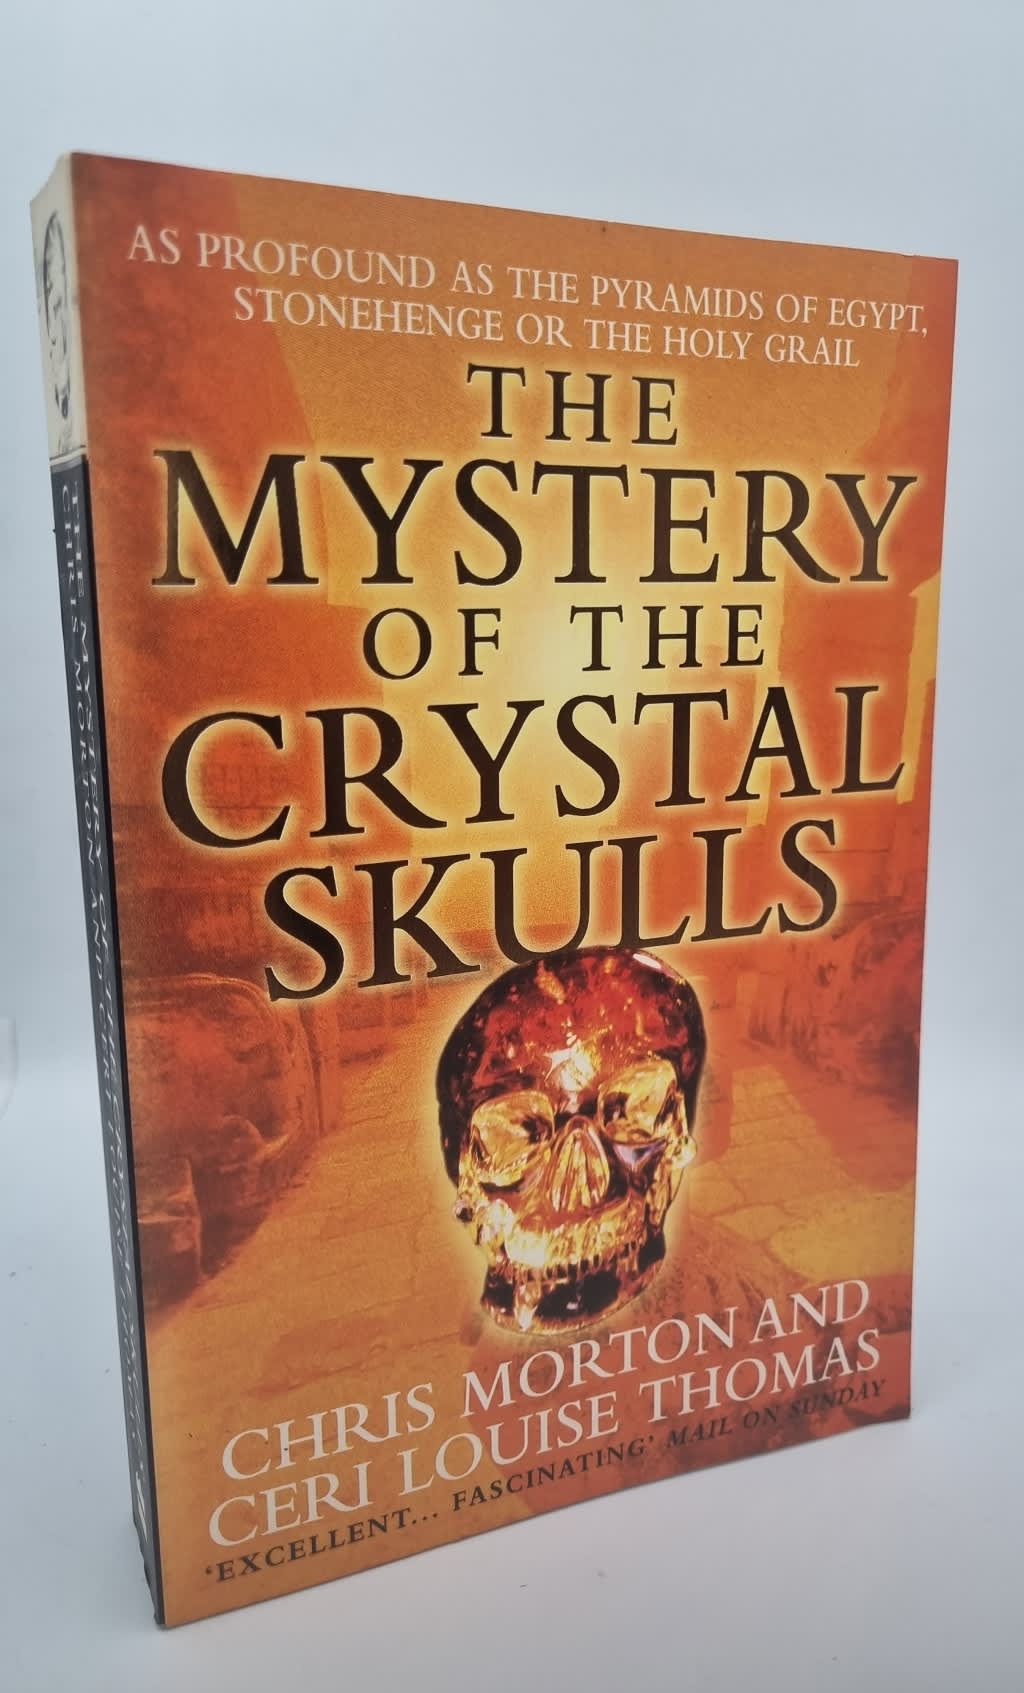 The Mystery of the Crystal Skulls, Book by Chris Morton, Ceri Louise  Thomas, Official Publisher Page